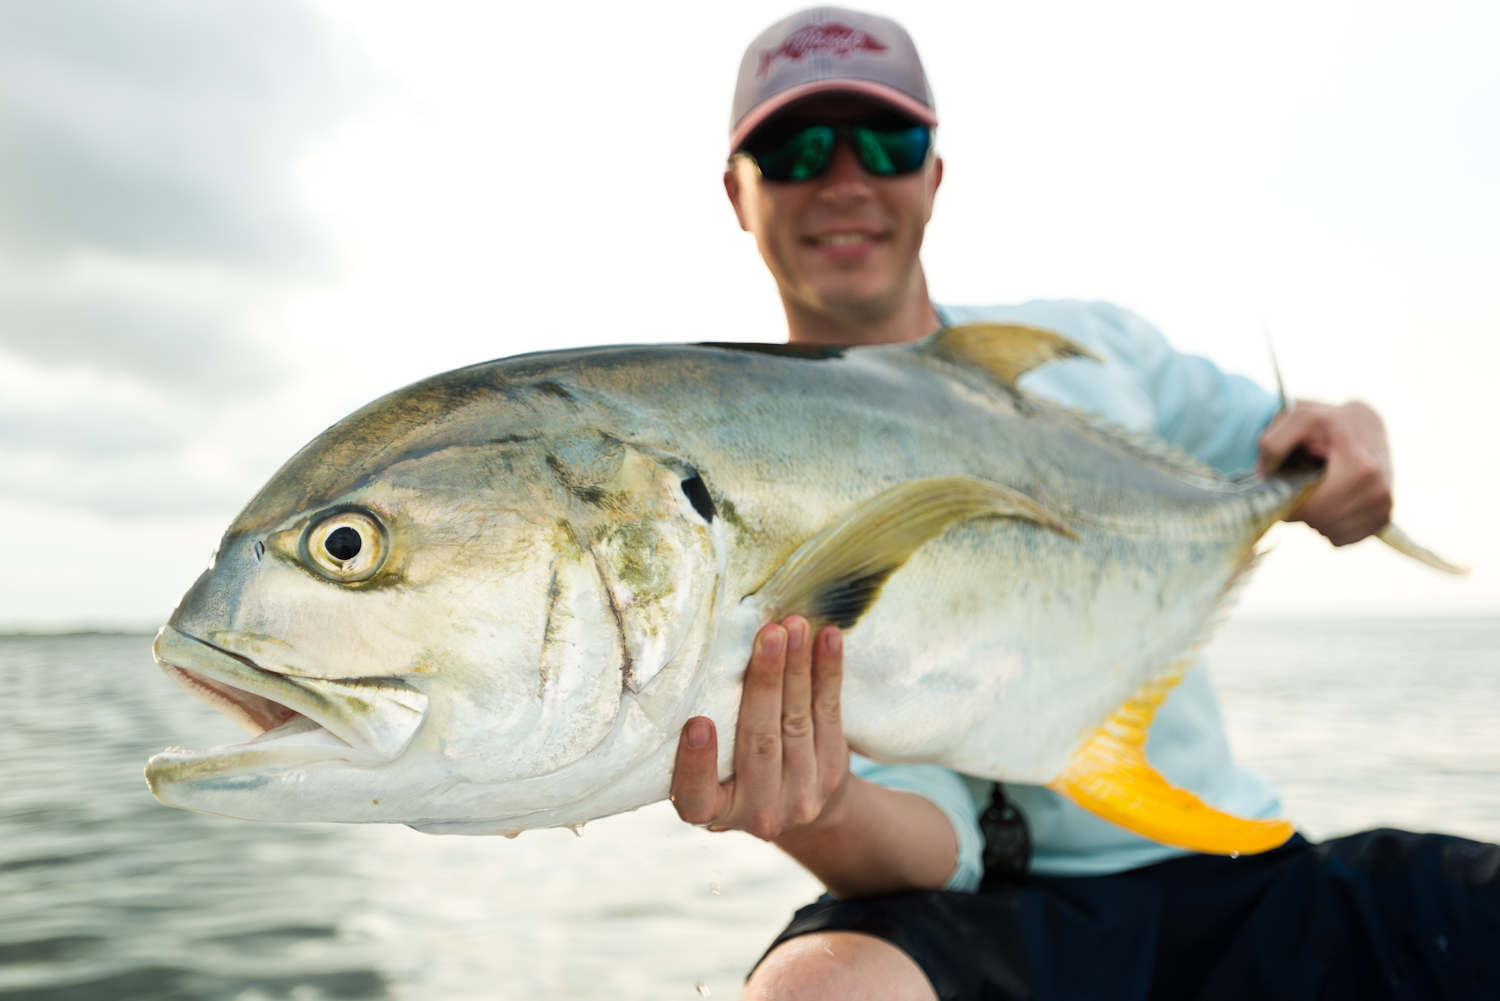 Southern-Fly-Expeditions-StephenNicoll-JackCrevalle-05Sep2015-2.jpg